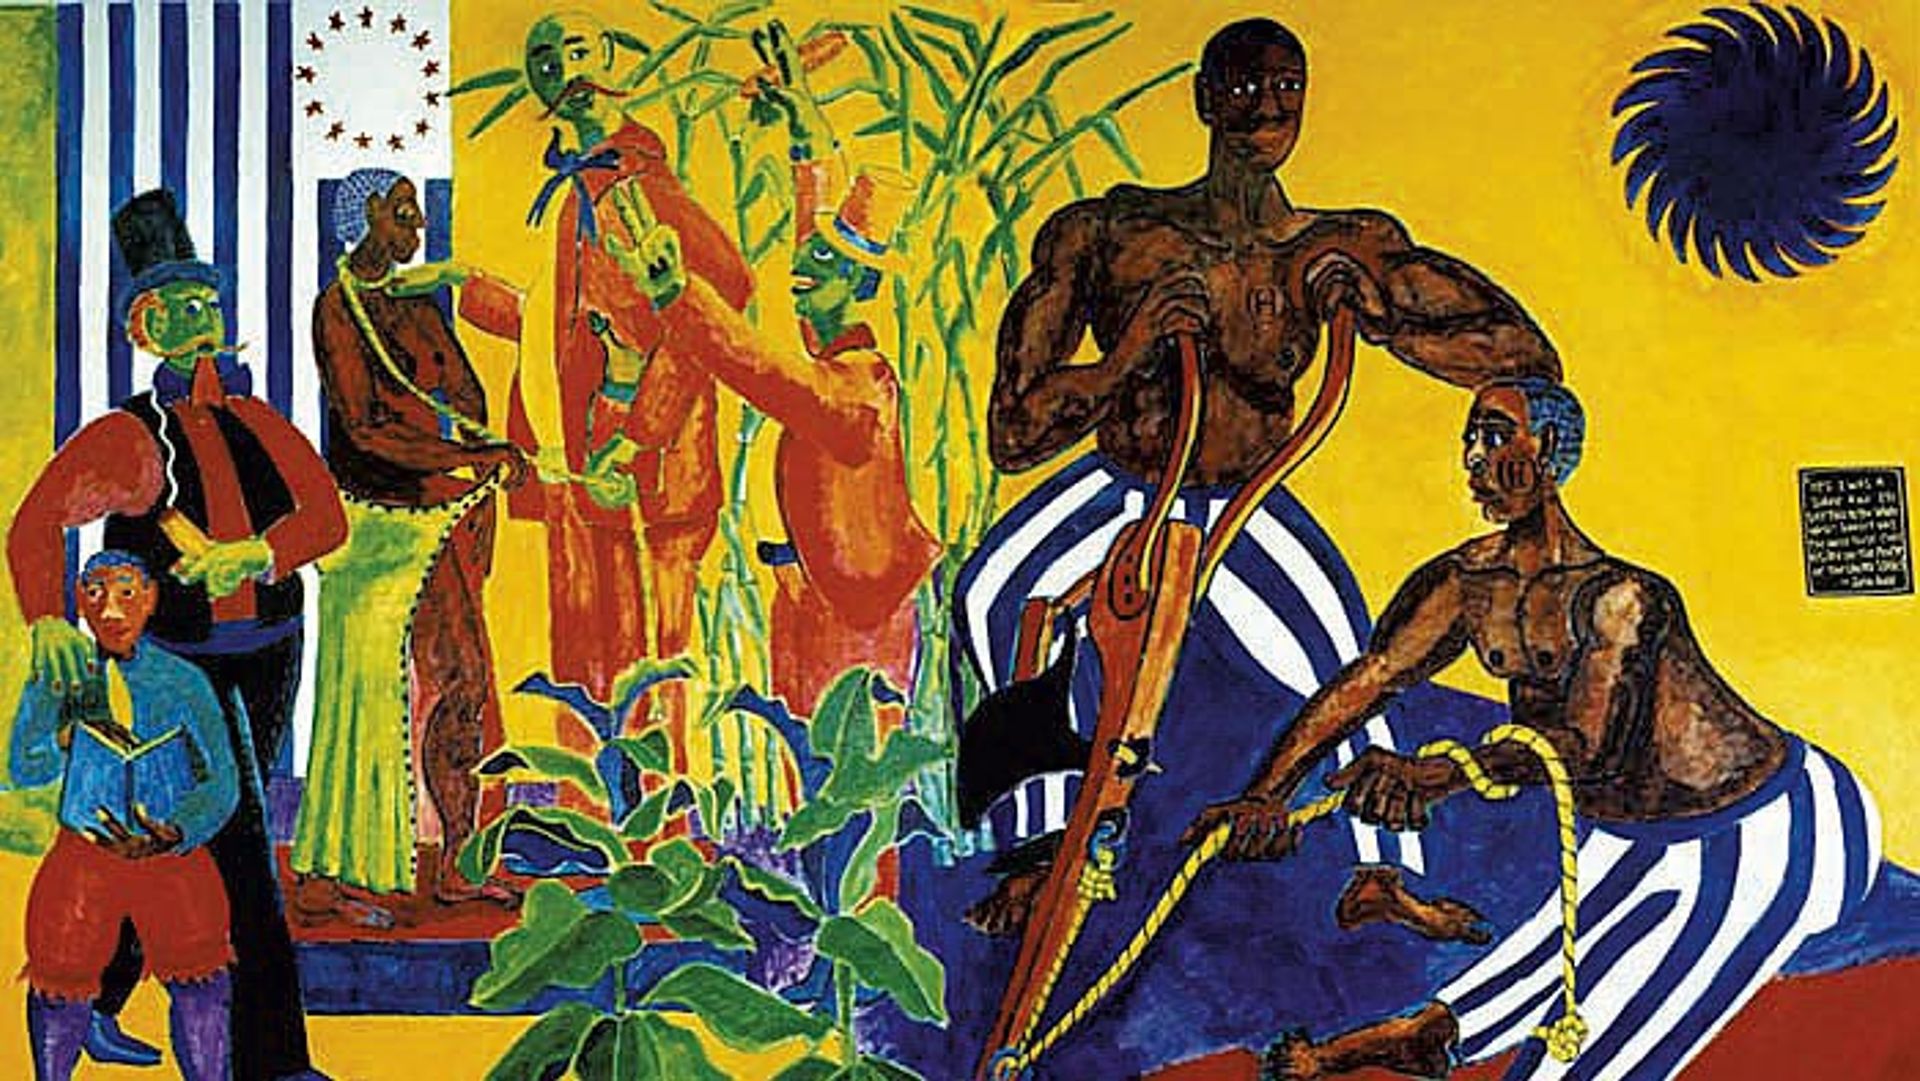 A section of the mural The Underground Railroad Vermont and the Fugitive Slave by Sam Kerson that had been displayed at Vermont Law School in Royalton Image courtesy Sam Kerson